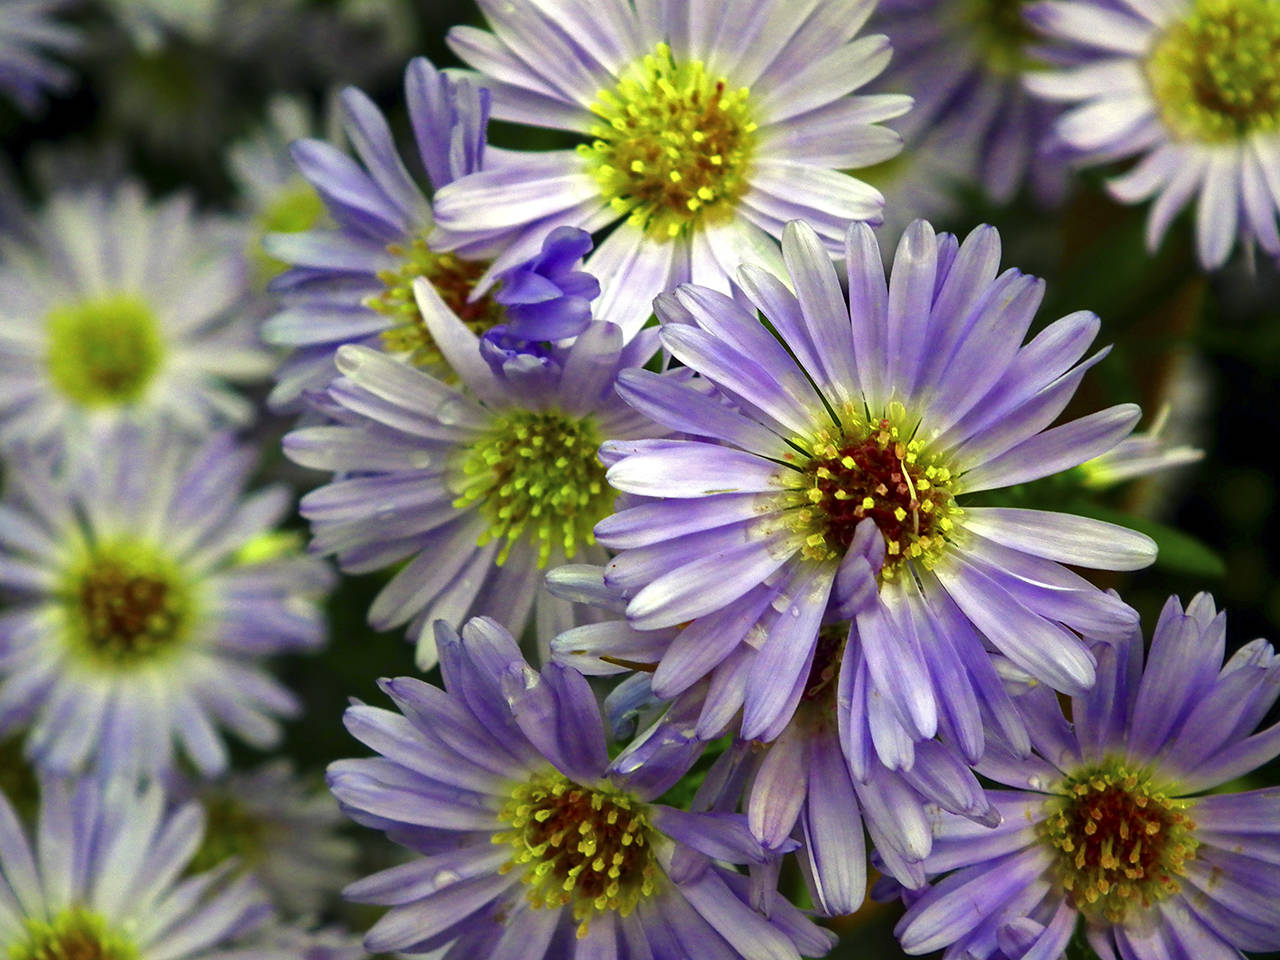 Ramesh NG photo                                The New York aster (Aster novi-bellgii) grows 4 feet wide and 3 feet tall with full clusters of bright blue-violet flowers.